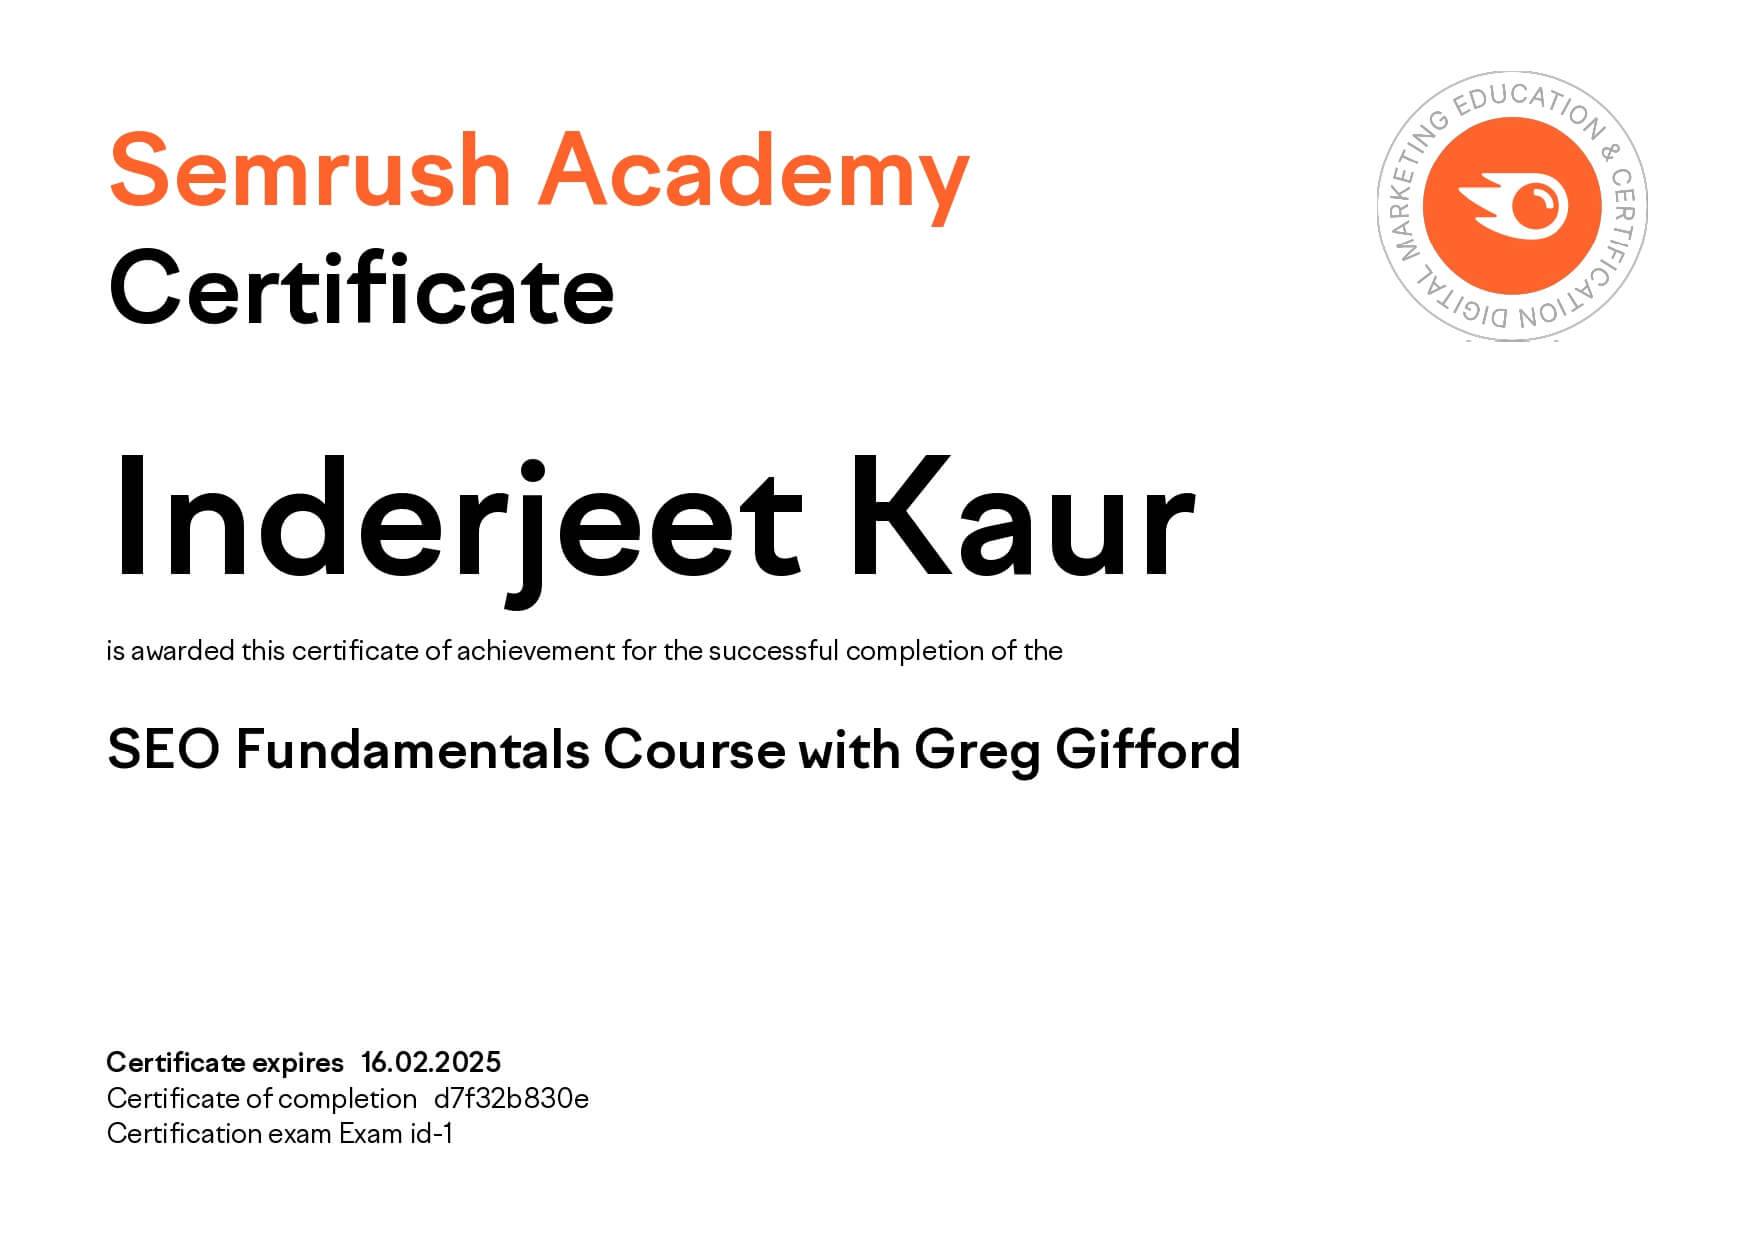 SEO-Fundamentals-Course-with-Greg-Gifford